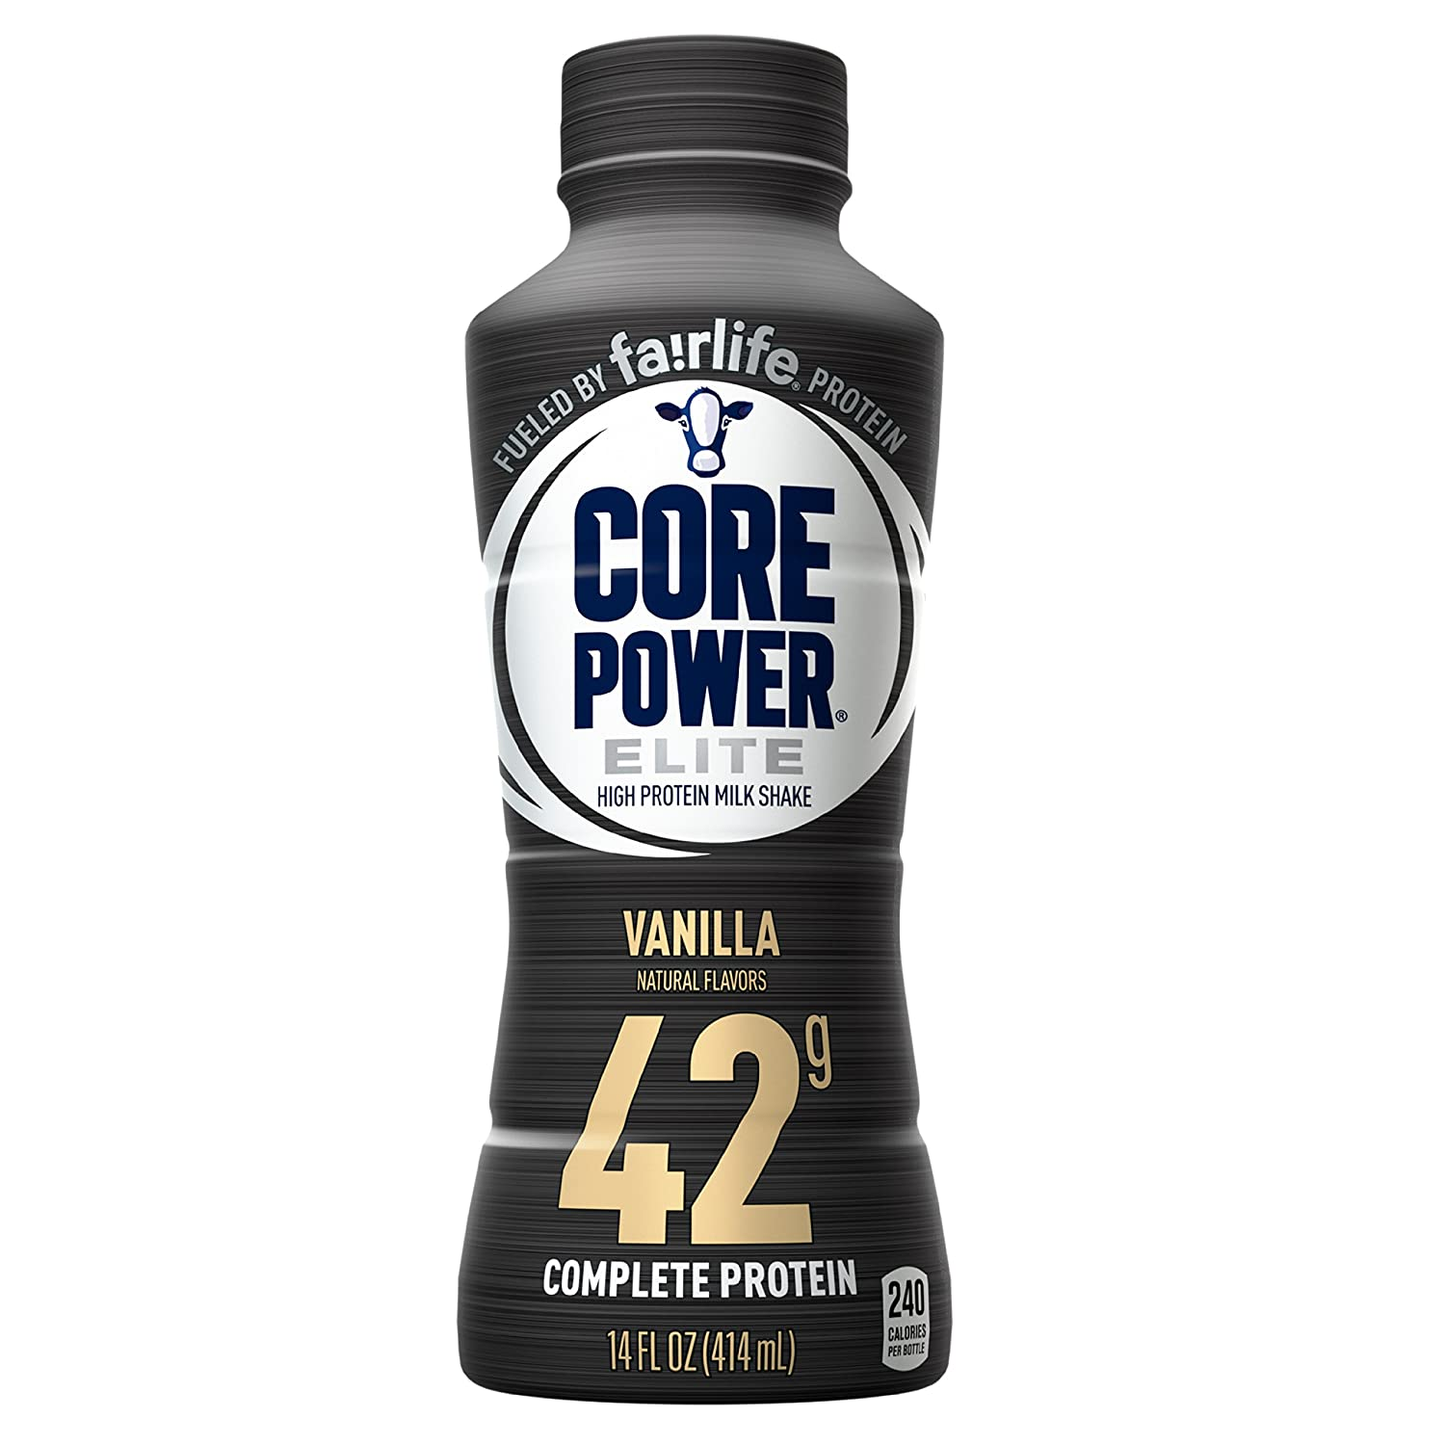 Core Power by Fairlife Elite High Protein (42G) Milk Shake, 14 Fl Oz Bottles, (Pack of 12) (Chocolate)